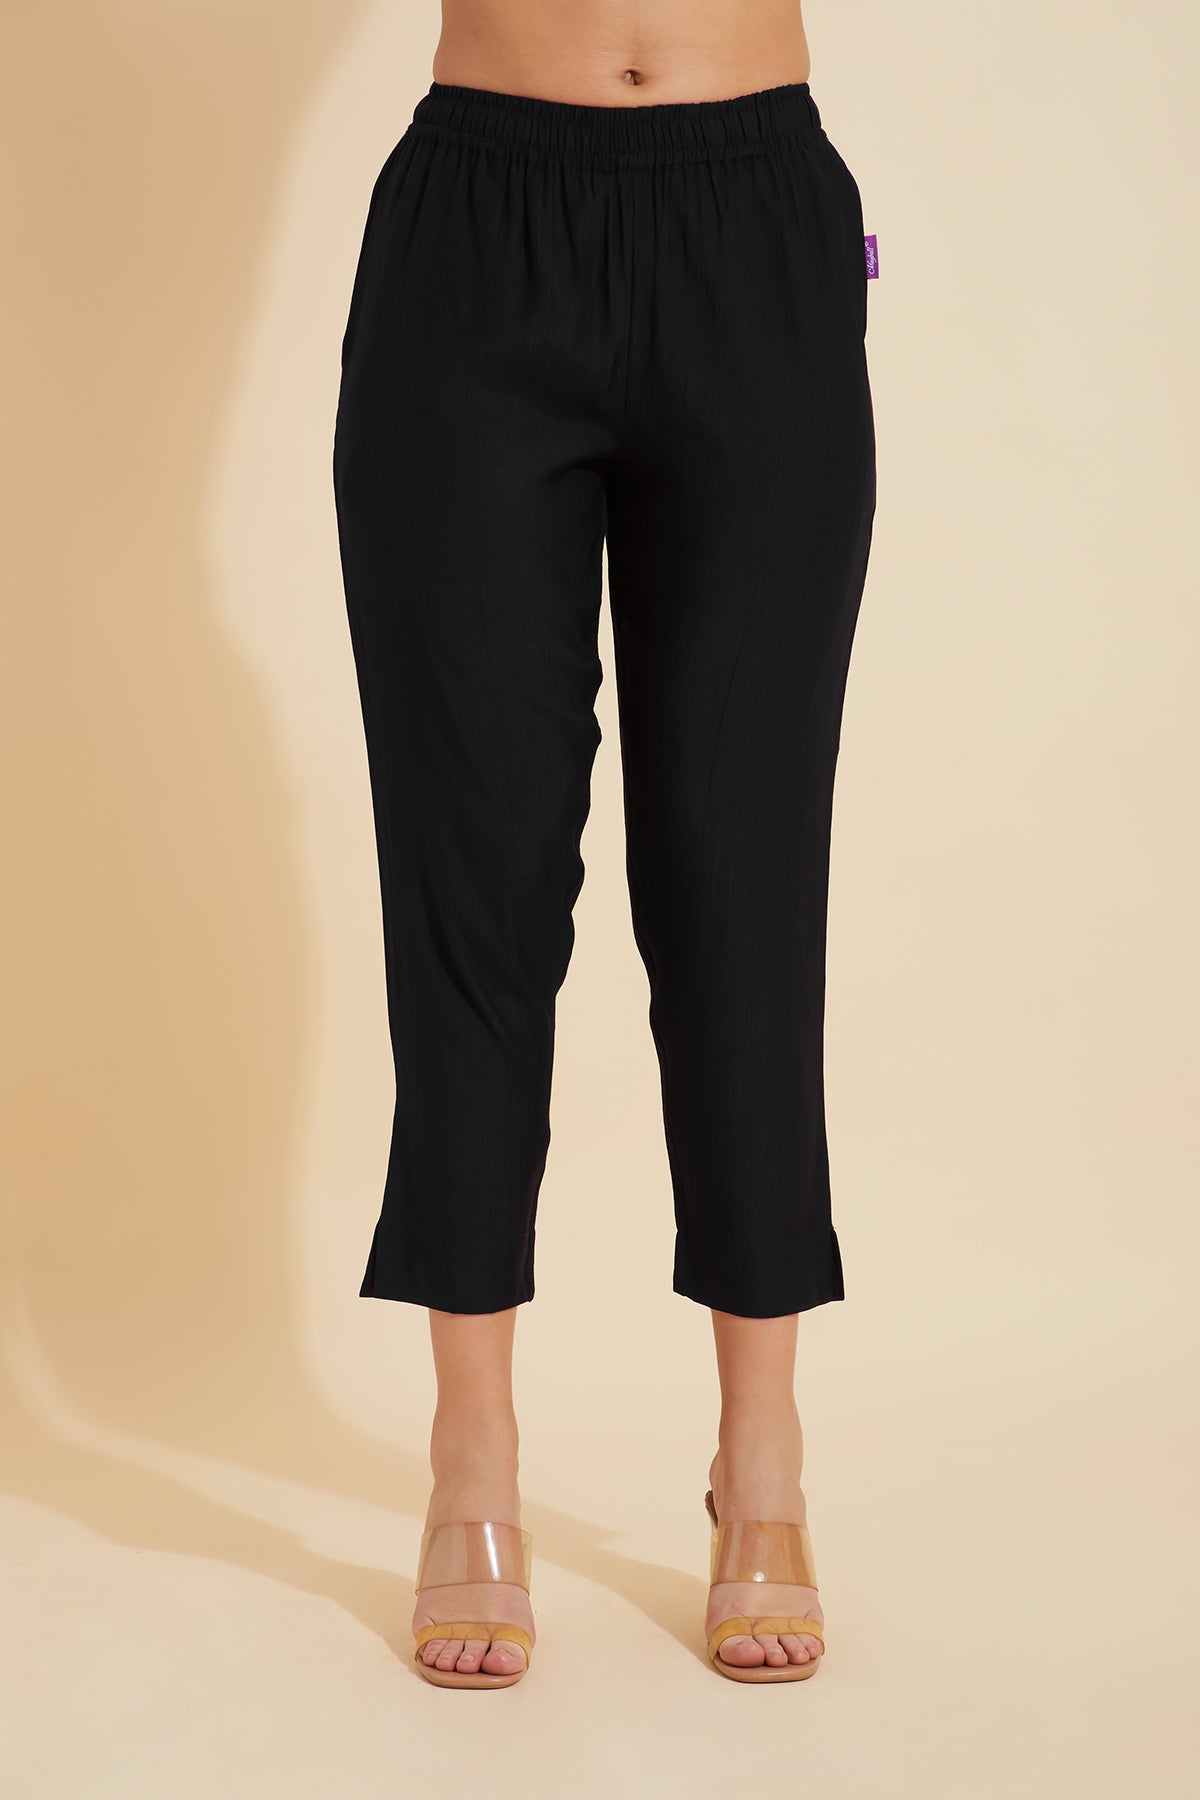 Solid Straight Pant - Black